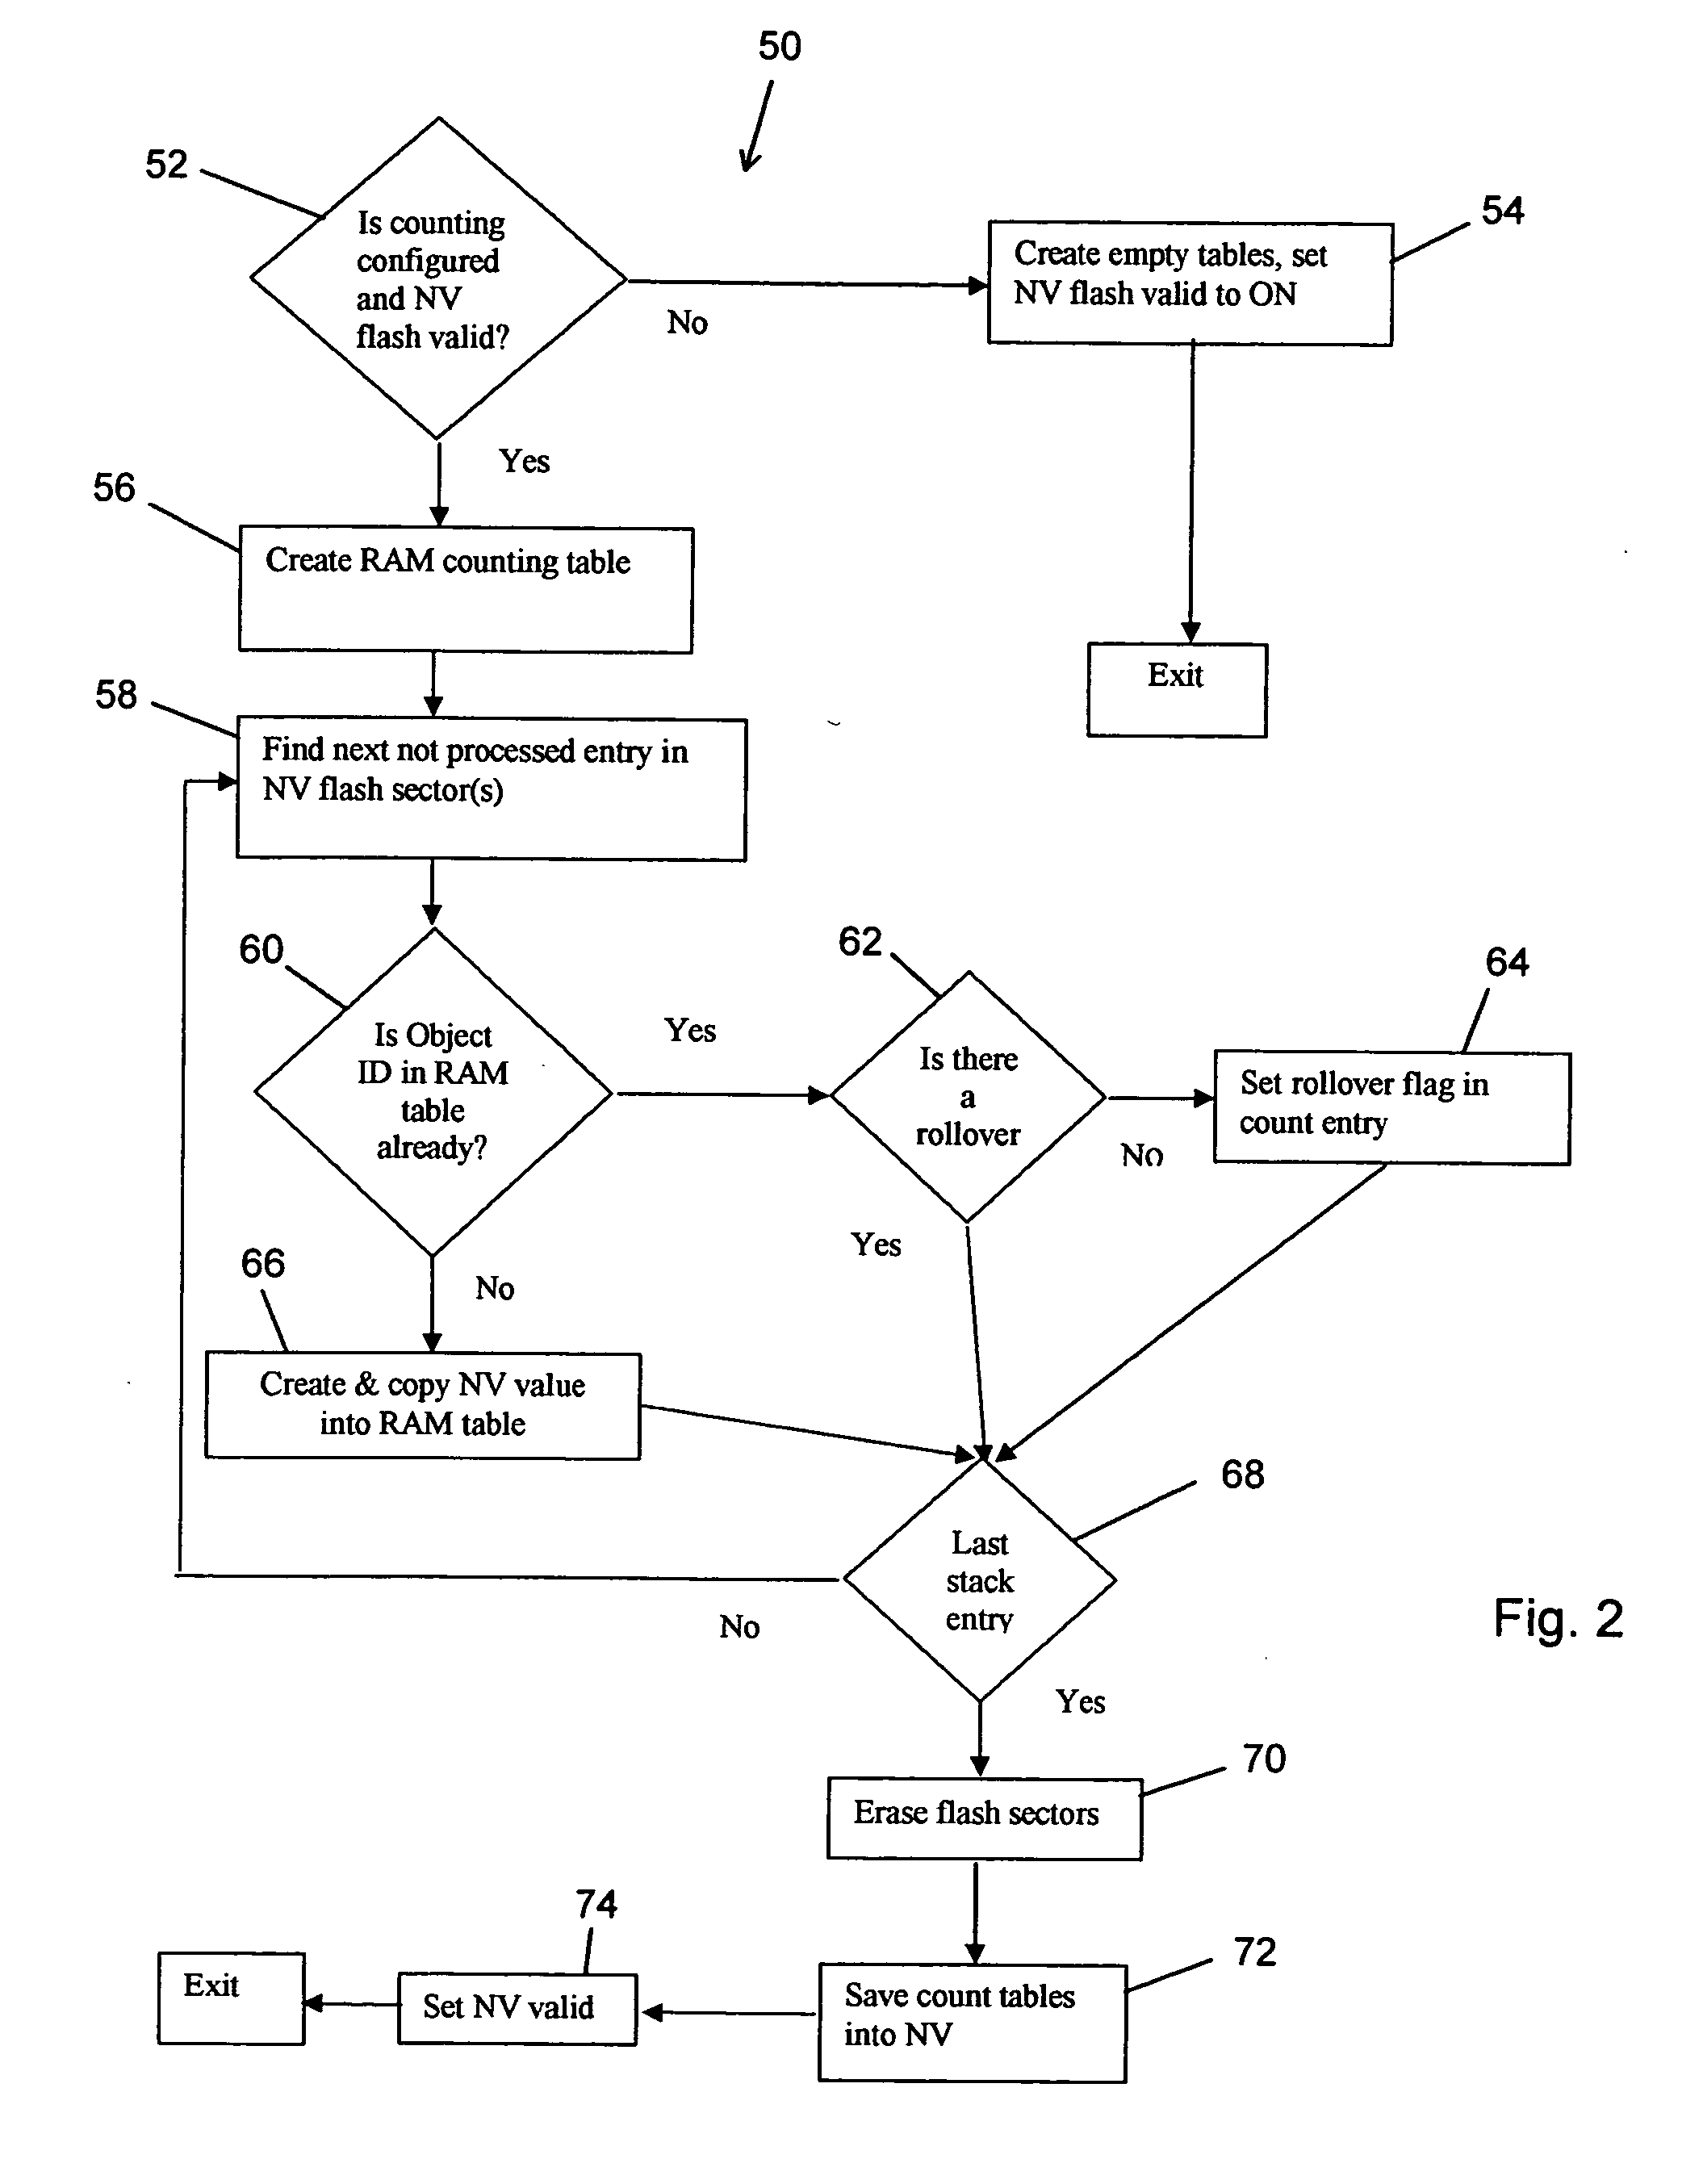 Method for counting POS printing of graphic objects